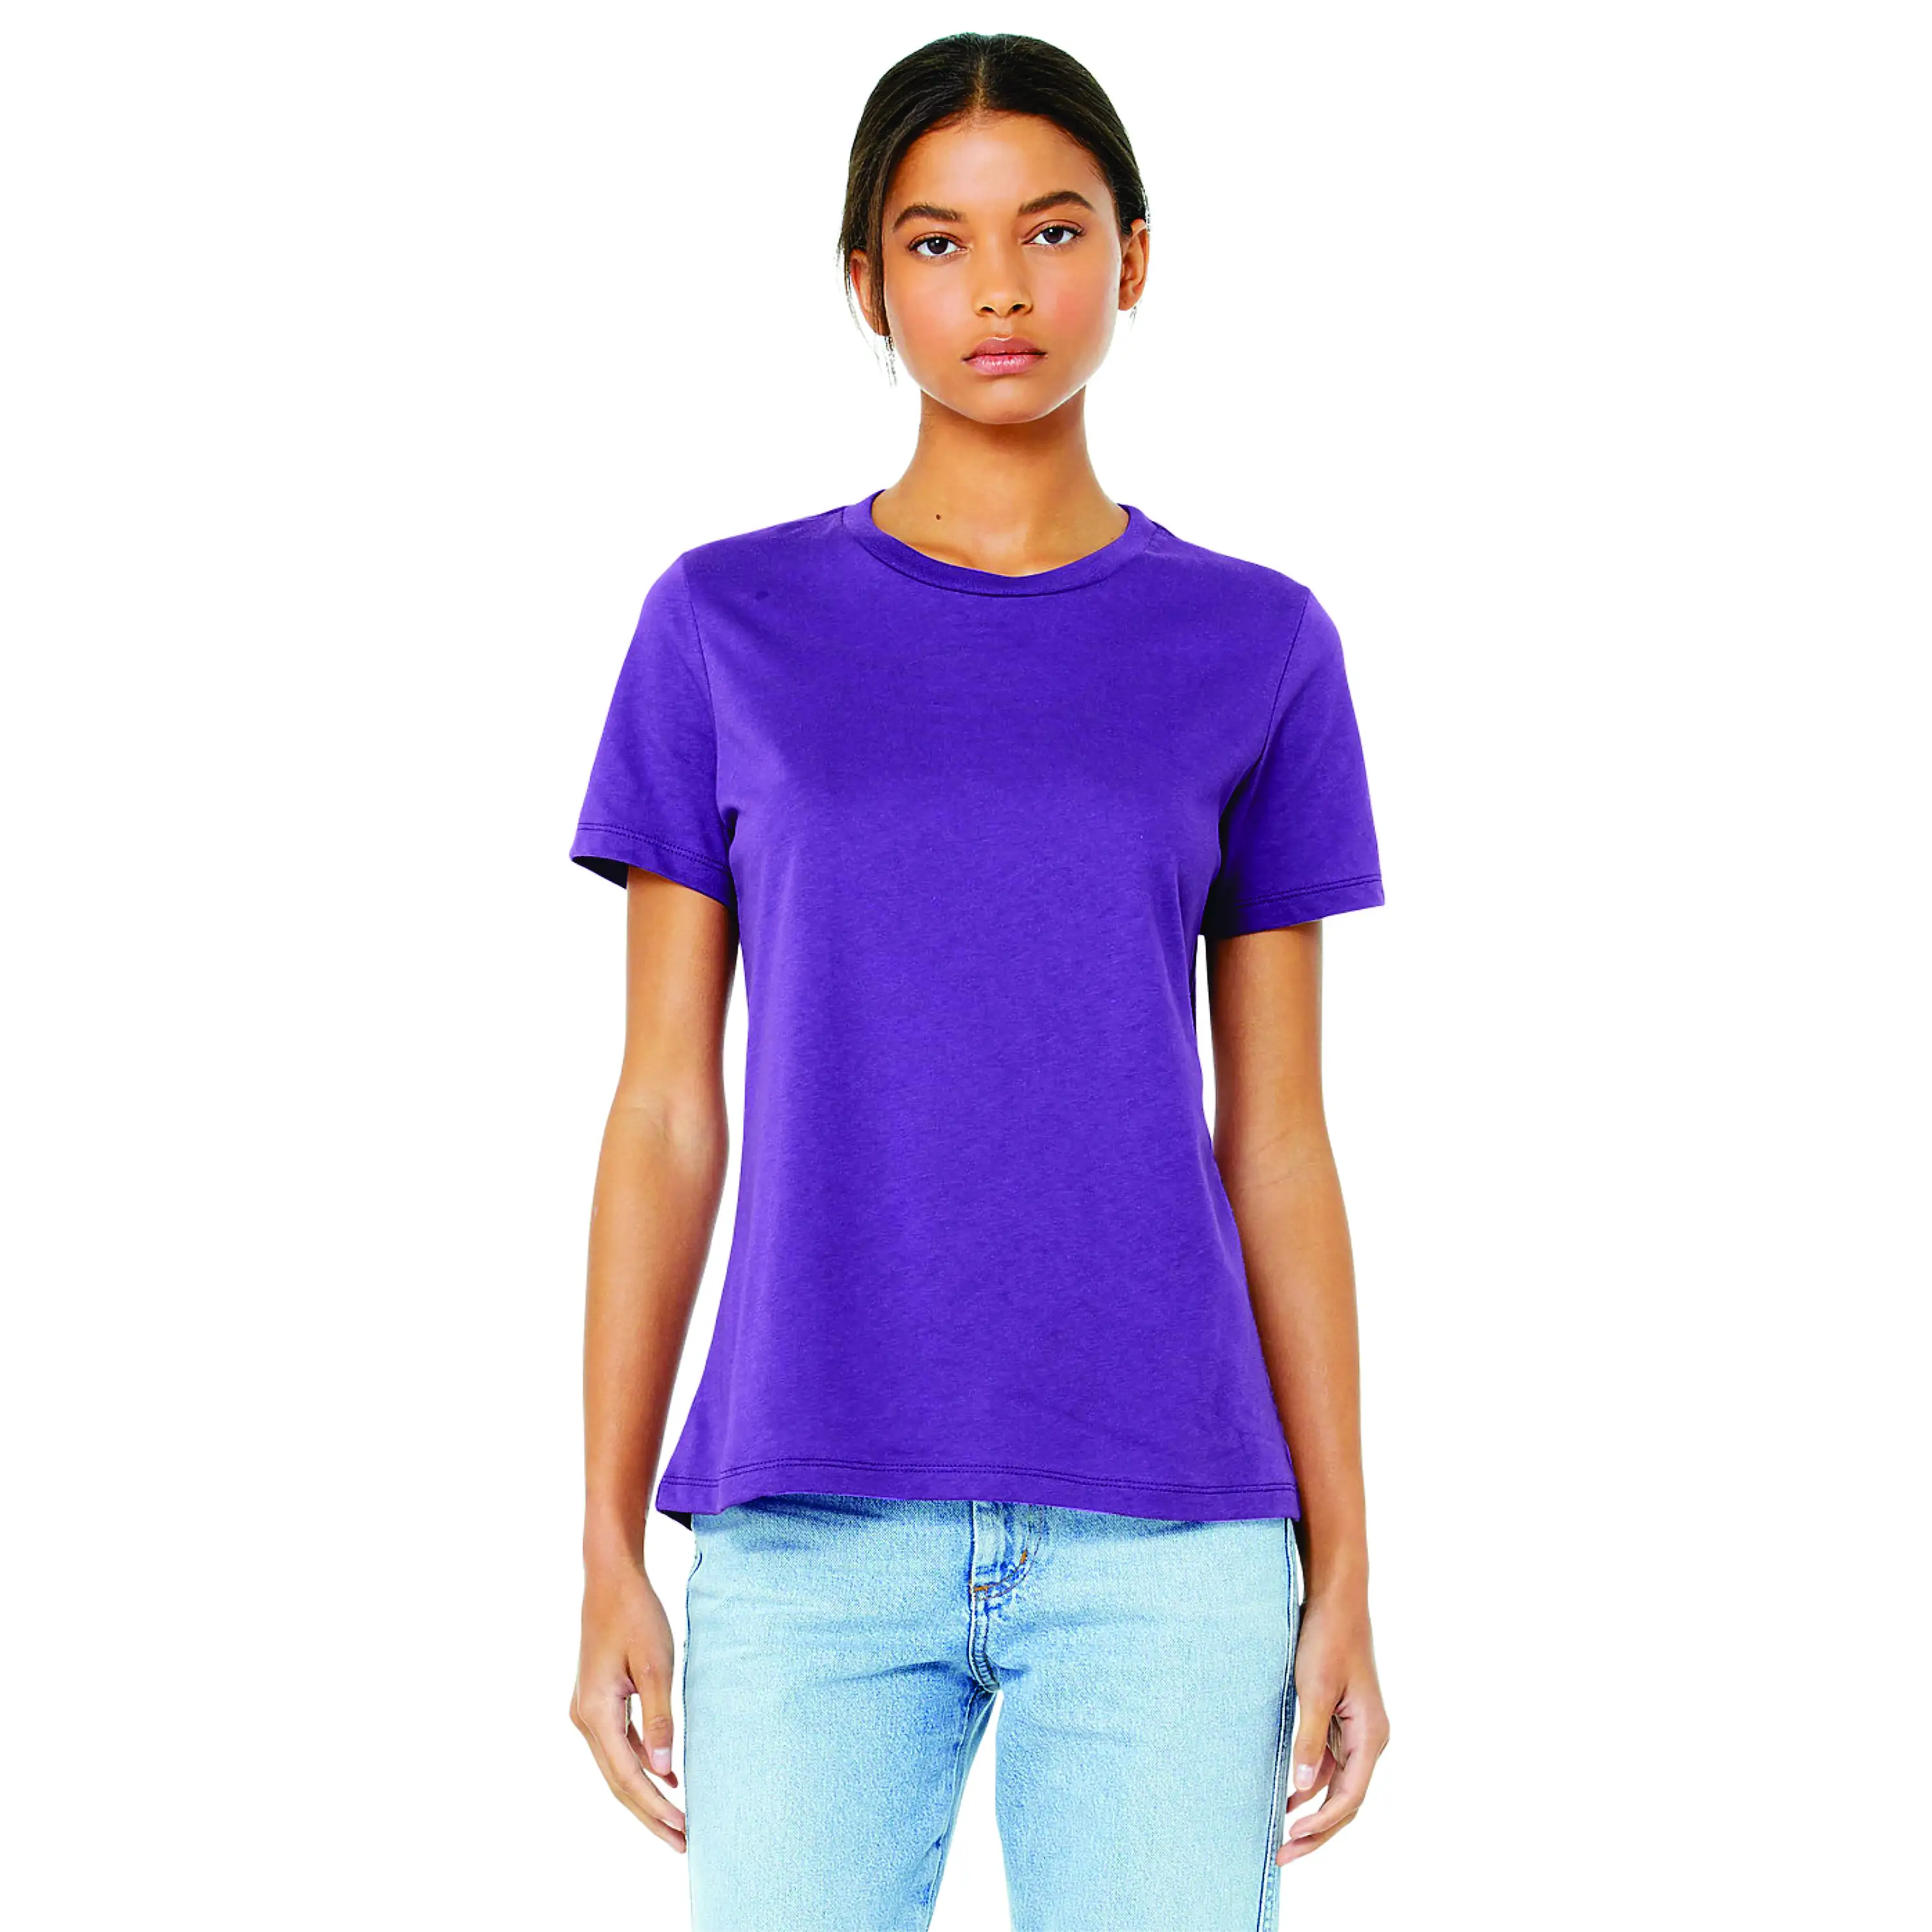 100% Airlume Combed and Ring Spun Cotton 32 Single 4.2 oz Royal Purple Womens Relaxed Jersey Short Sleeve T-Shirt